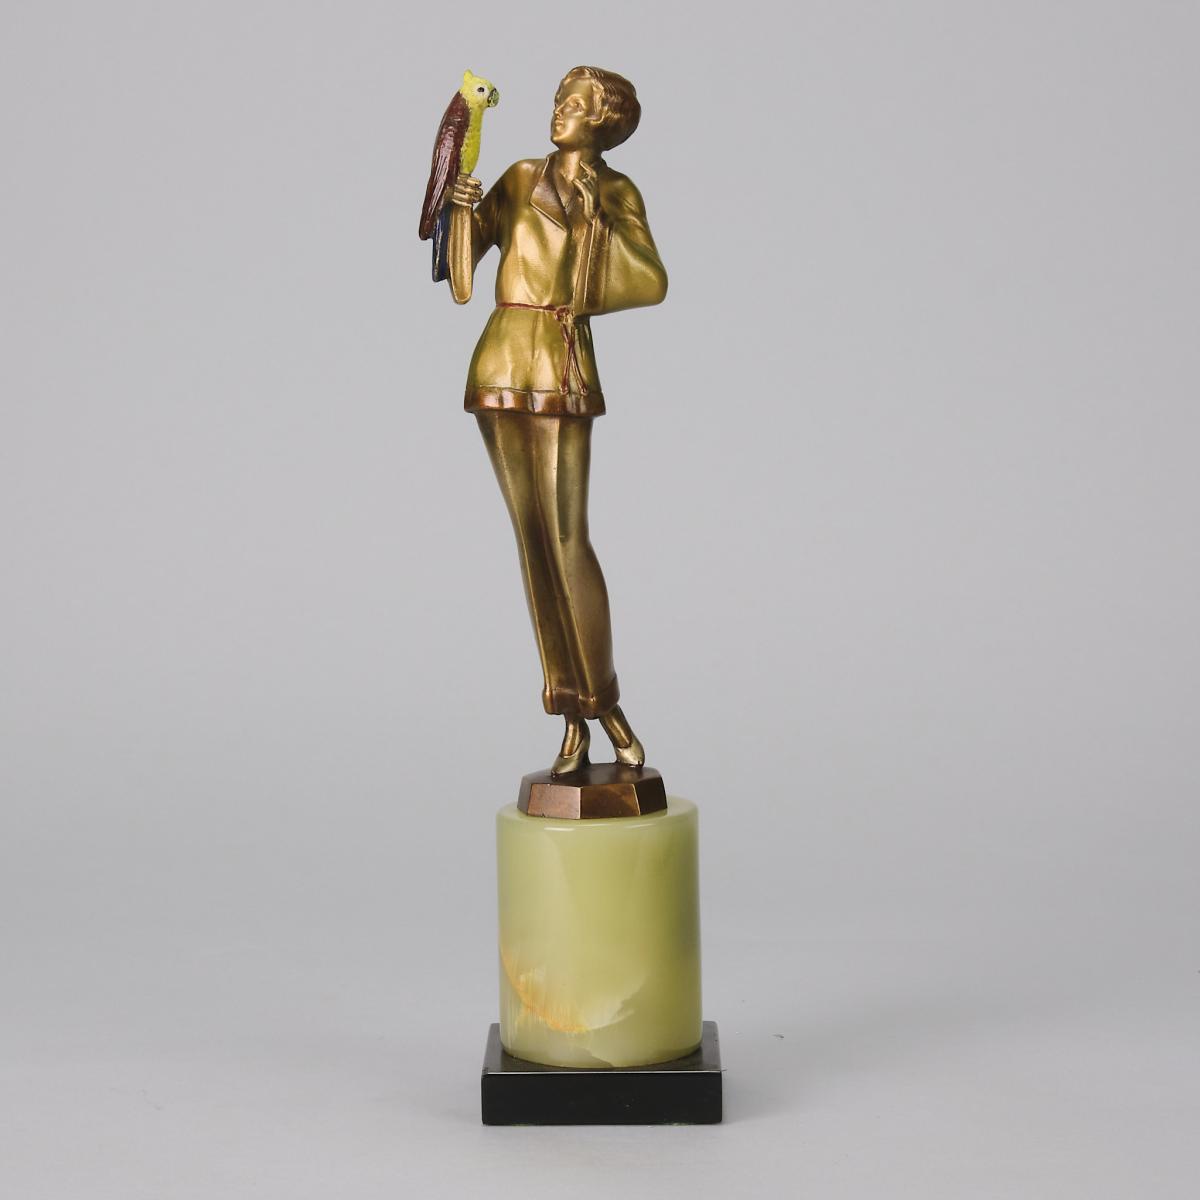 Cold-Painted Bronze Sculpture entitled "Girl with Parrot" by Josef Lorenzl